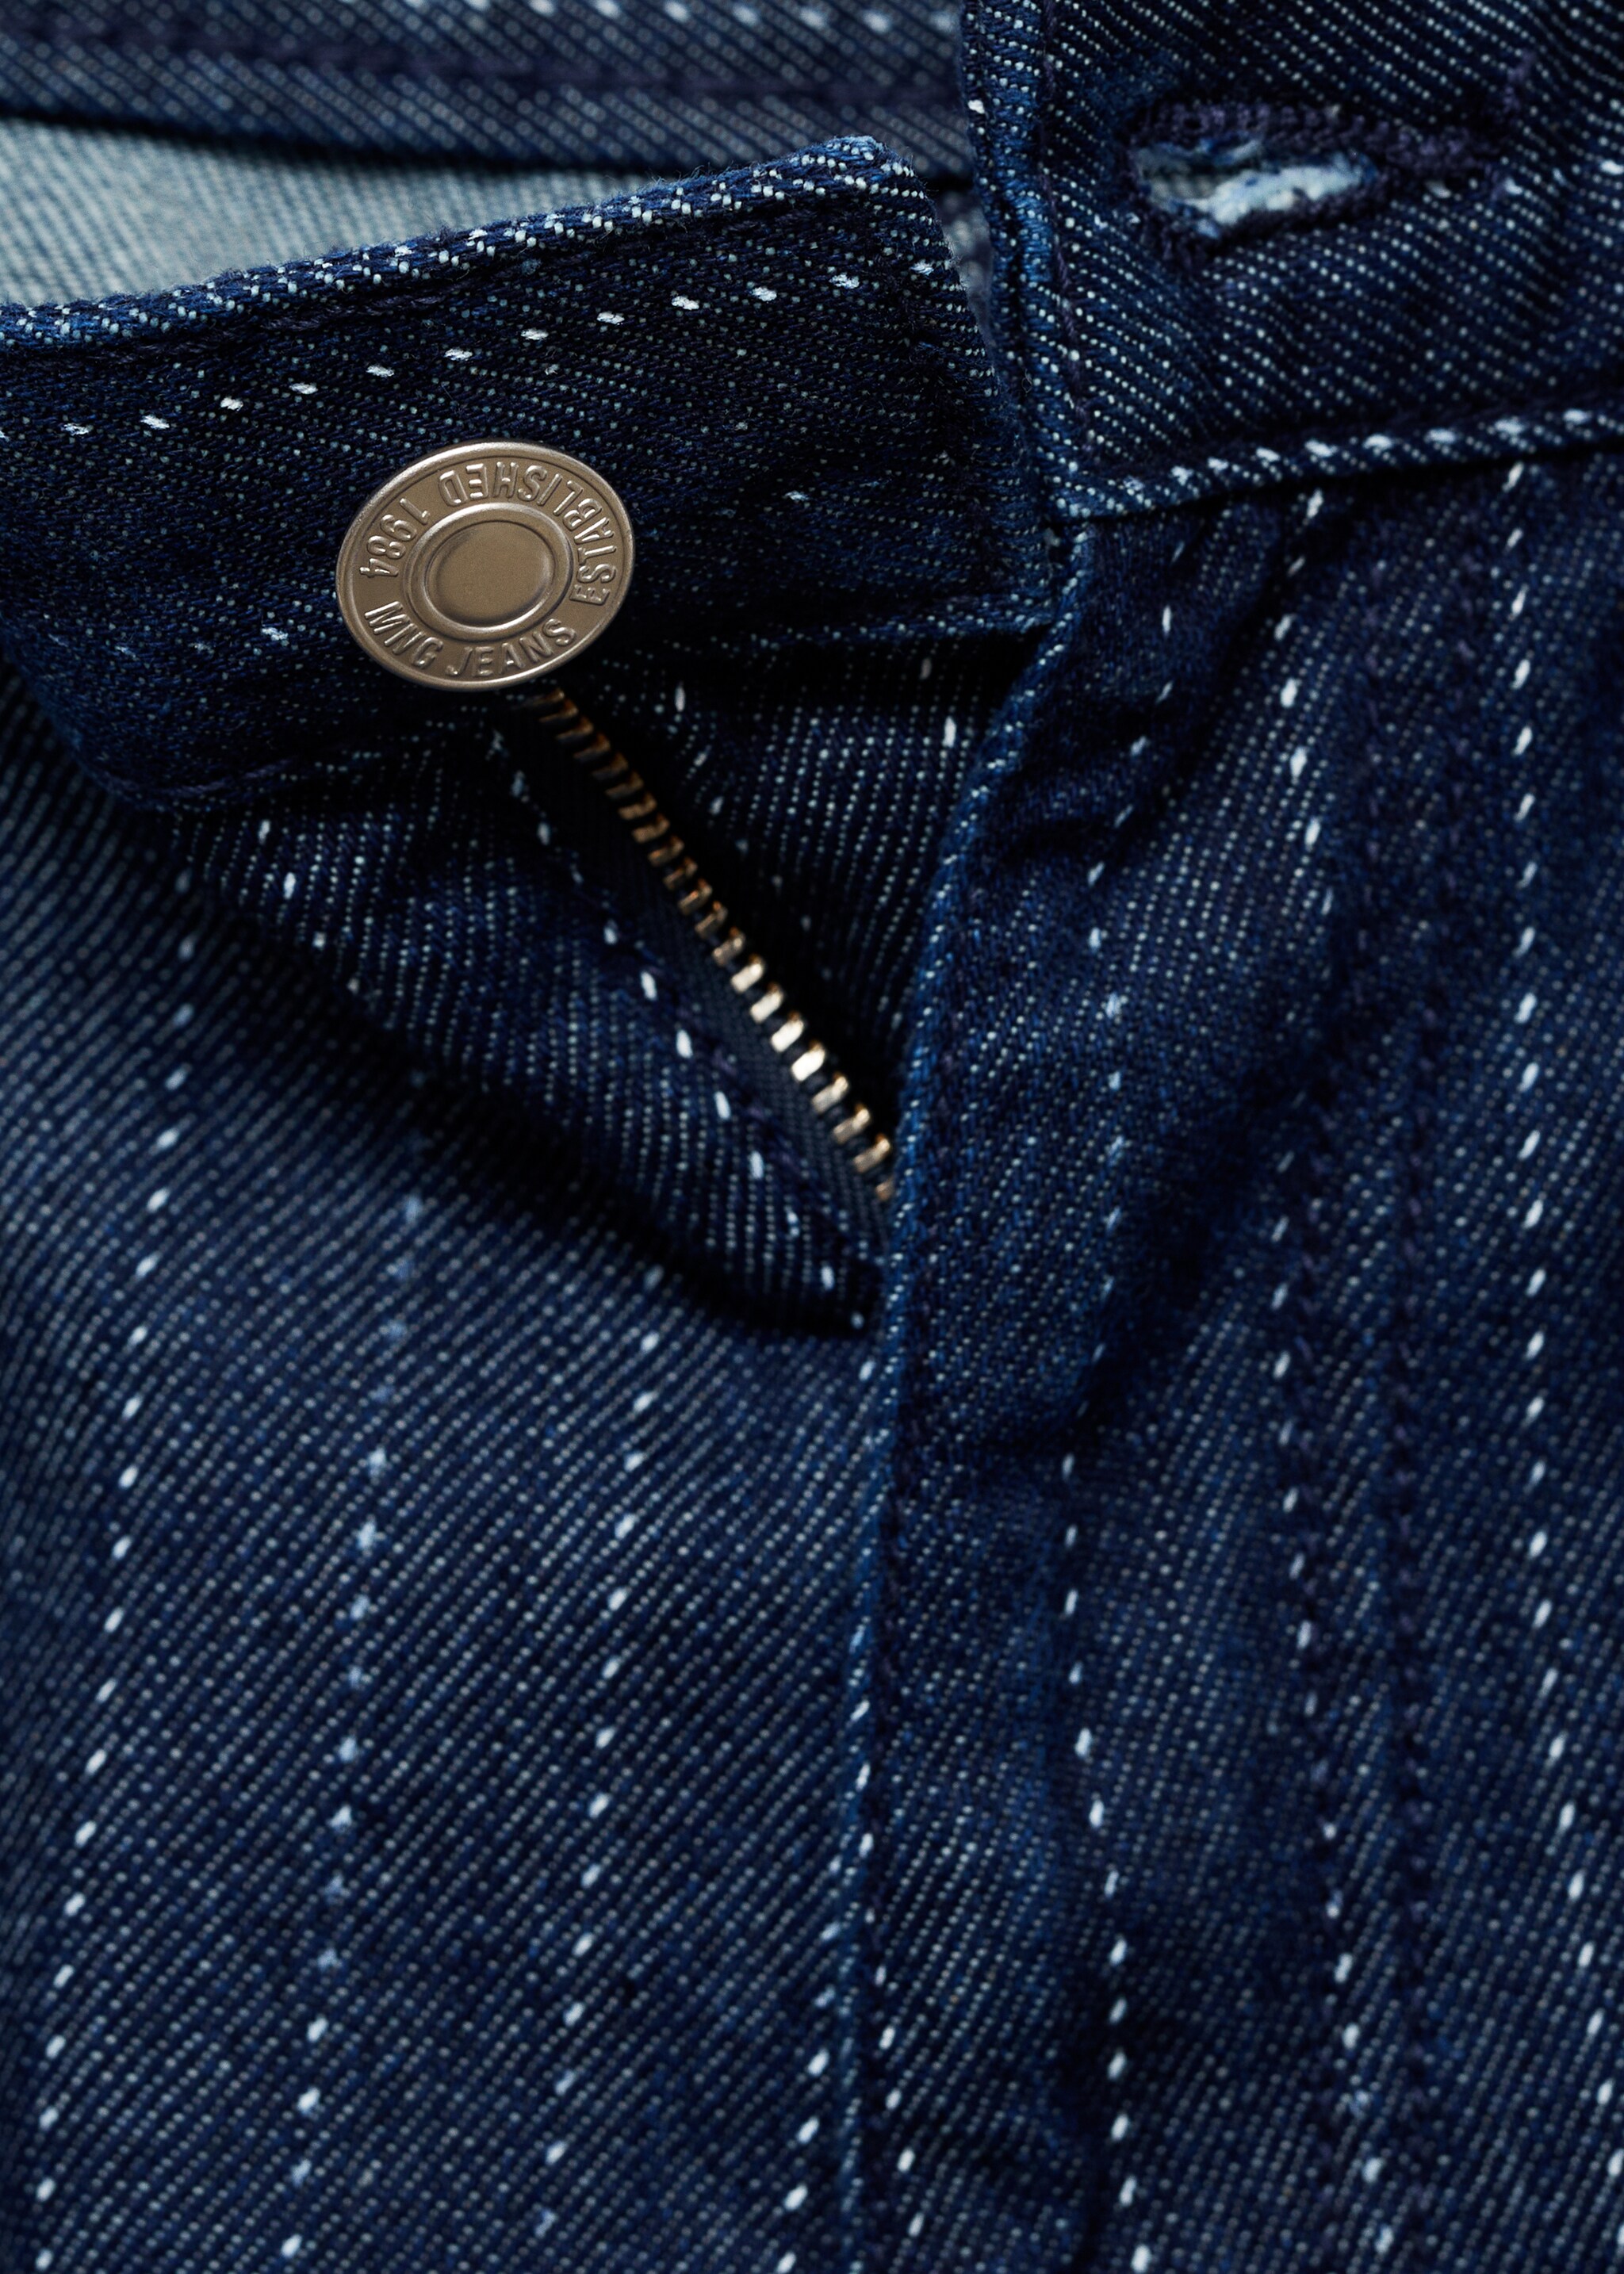 Denim bermuda shorts with decorative stitching - Details of the article 8